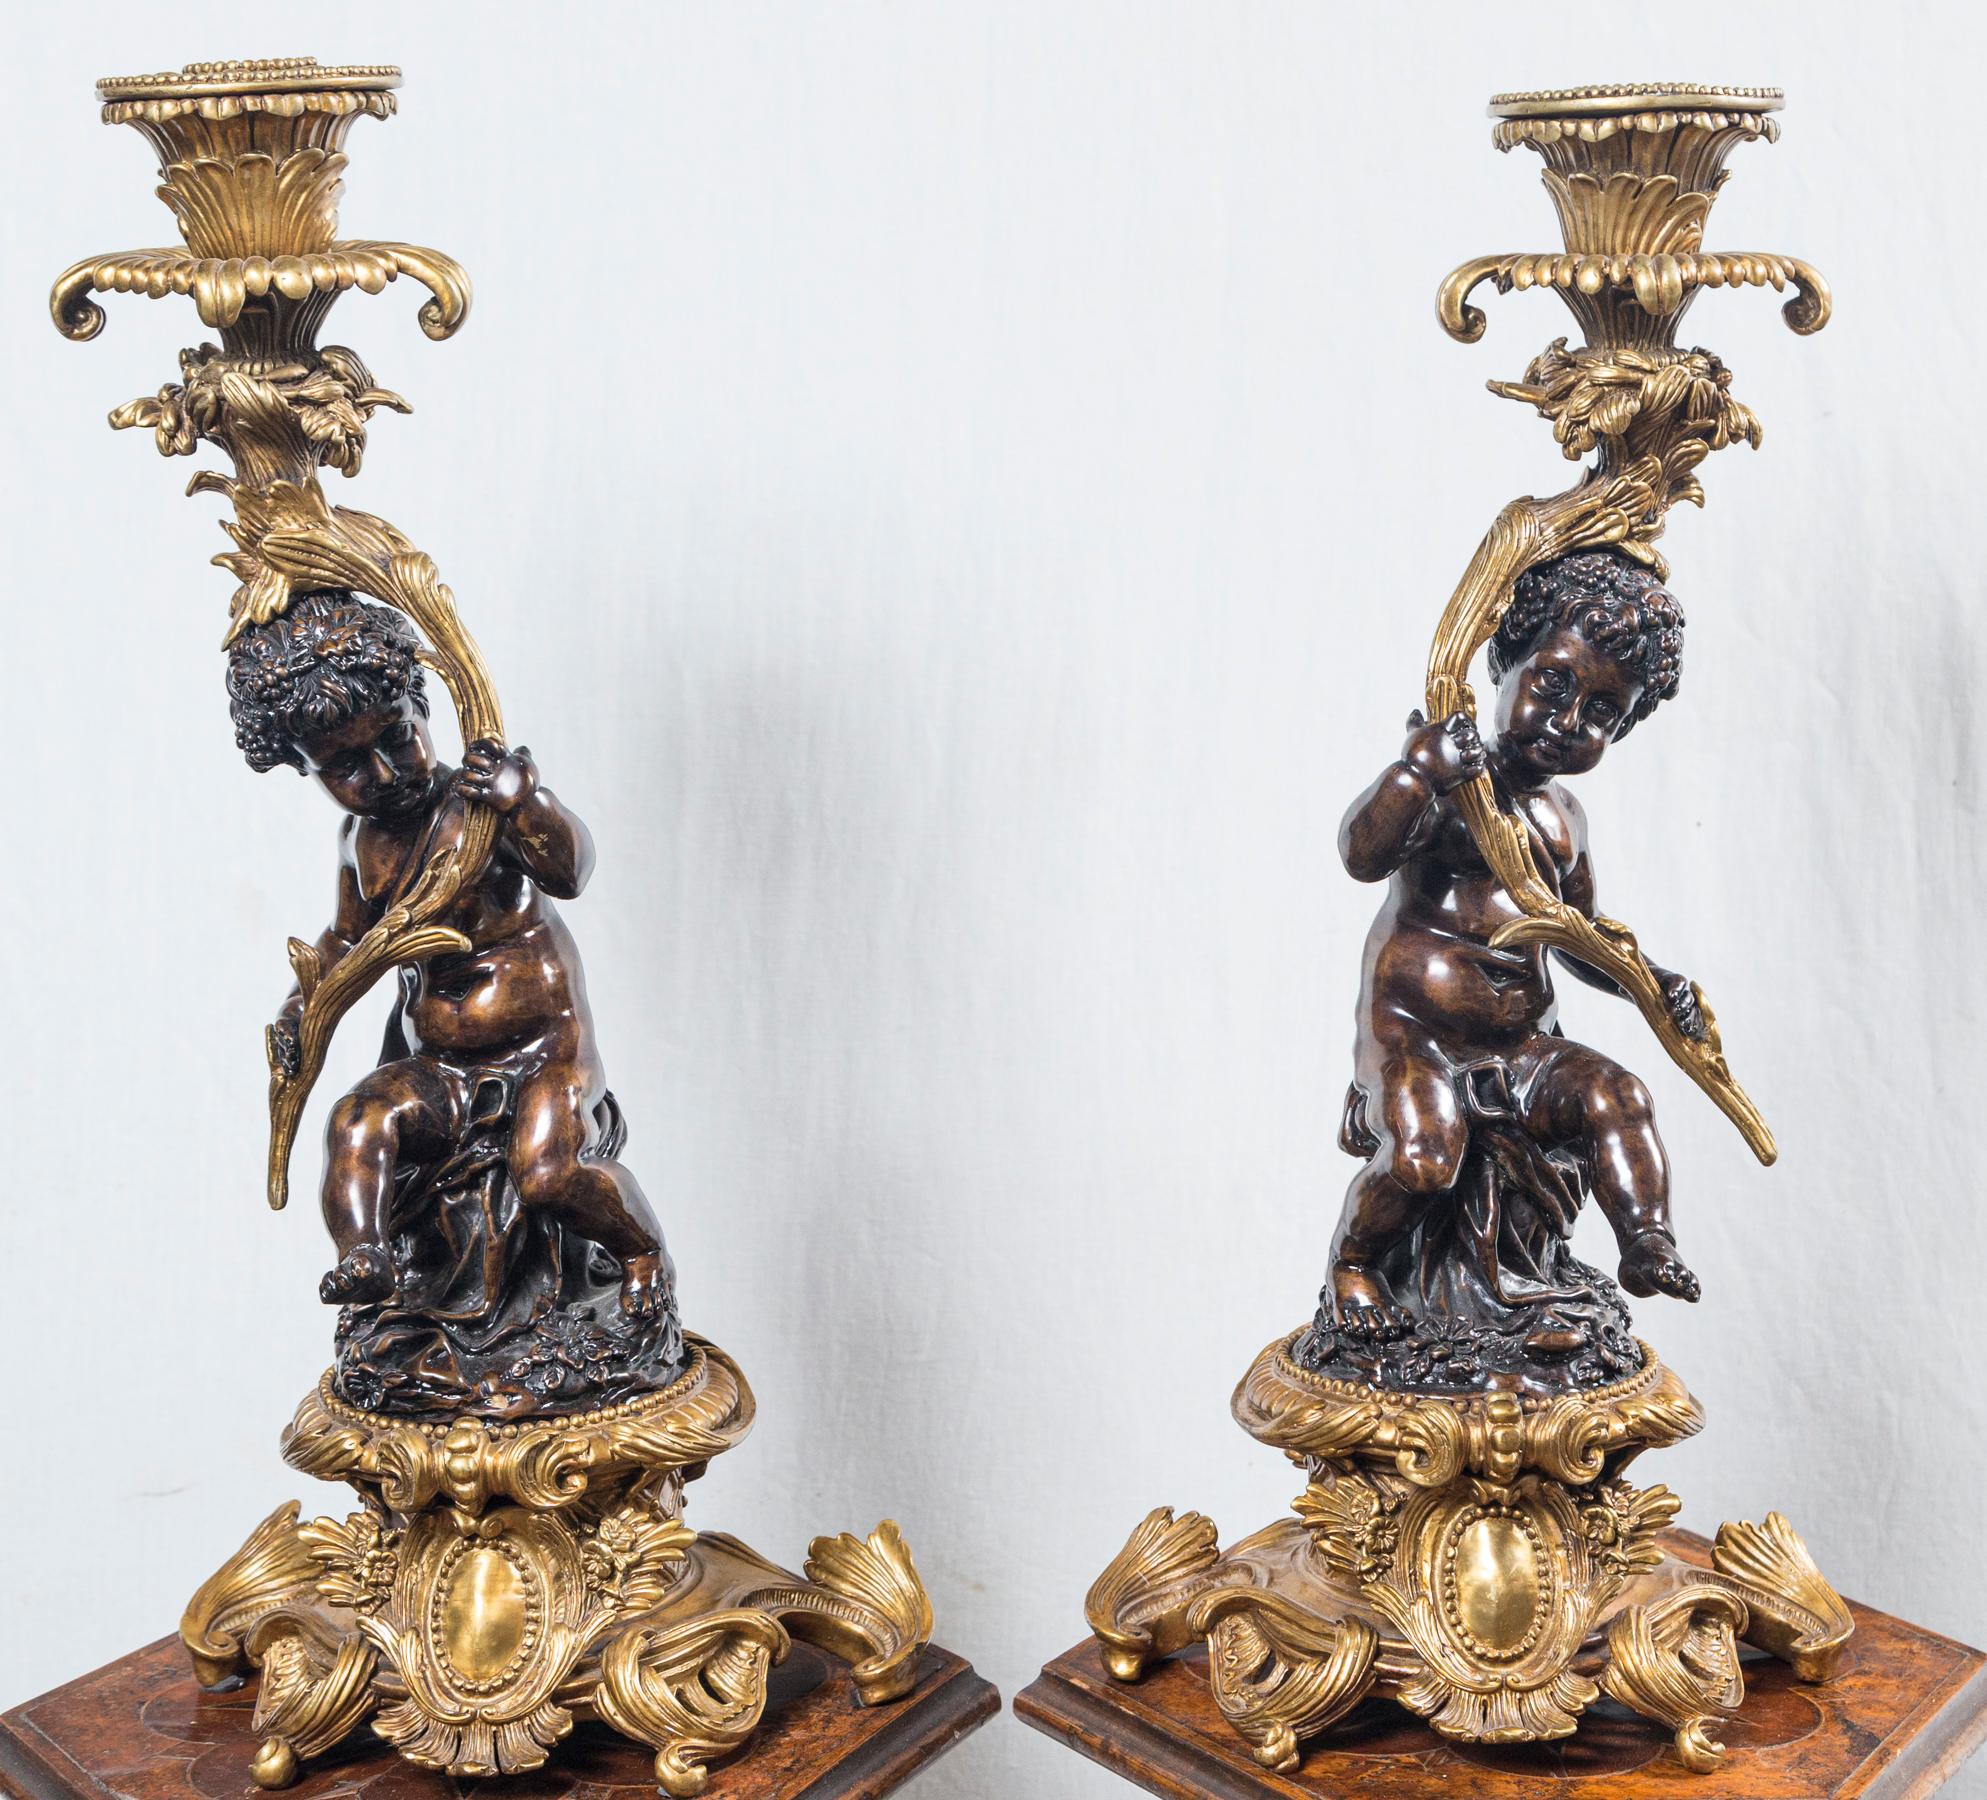 Rococo style gilt bronze base, each putto sits on a patinated rock form base. They hold a tall branch that supports the candle cup and baubeche at the top. Grape clusters adorn their hair.
The putti are very much, stylistically, in the manner of